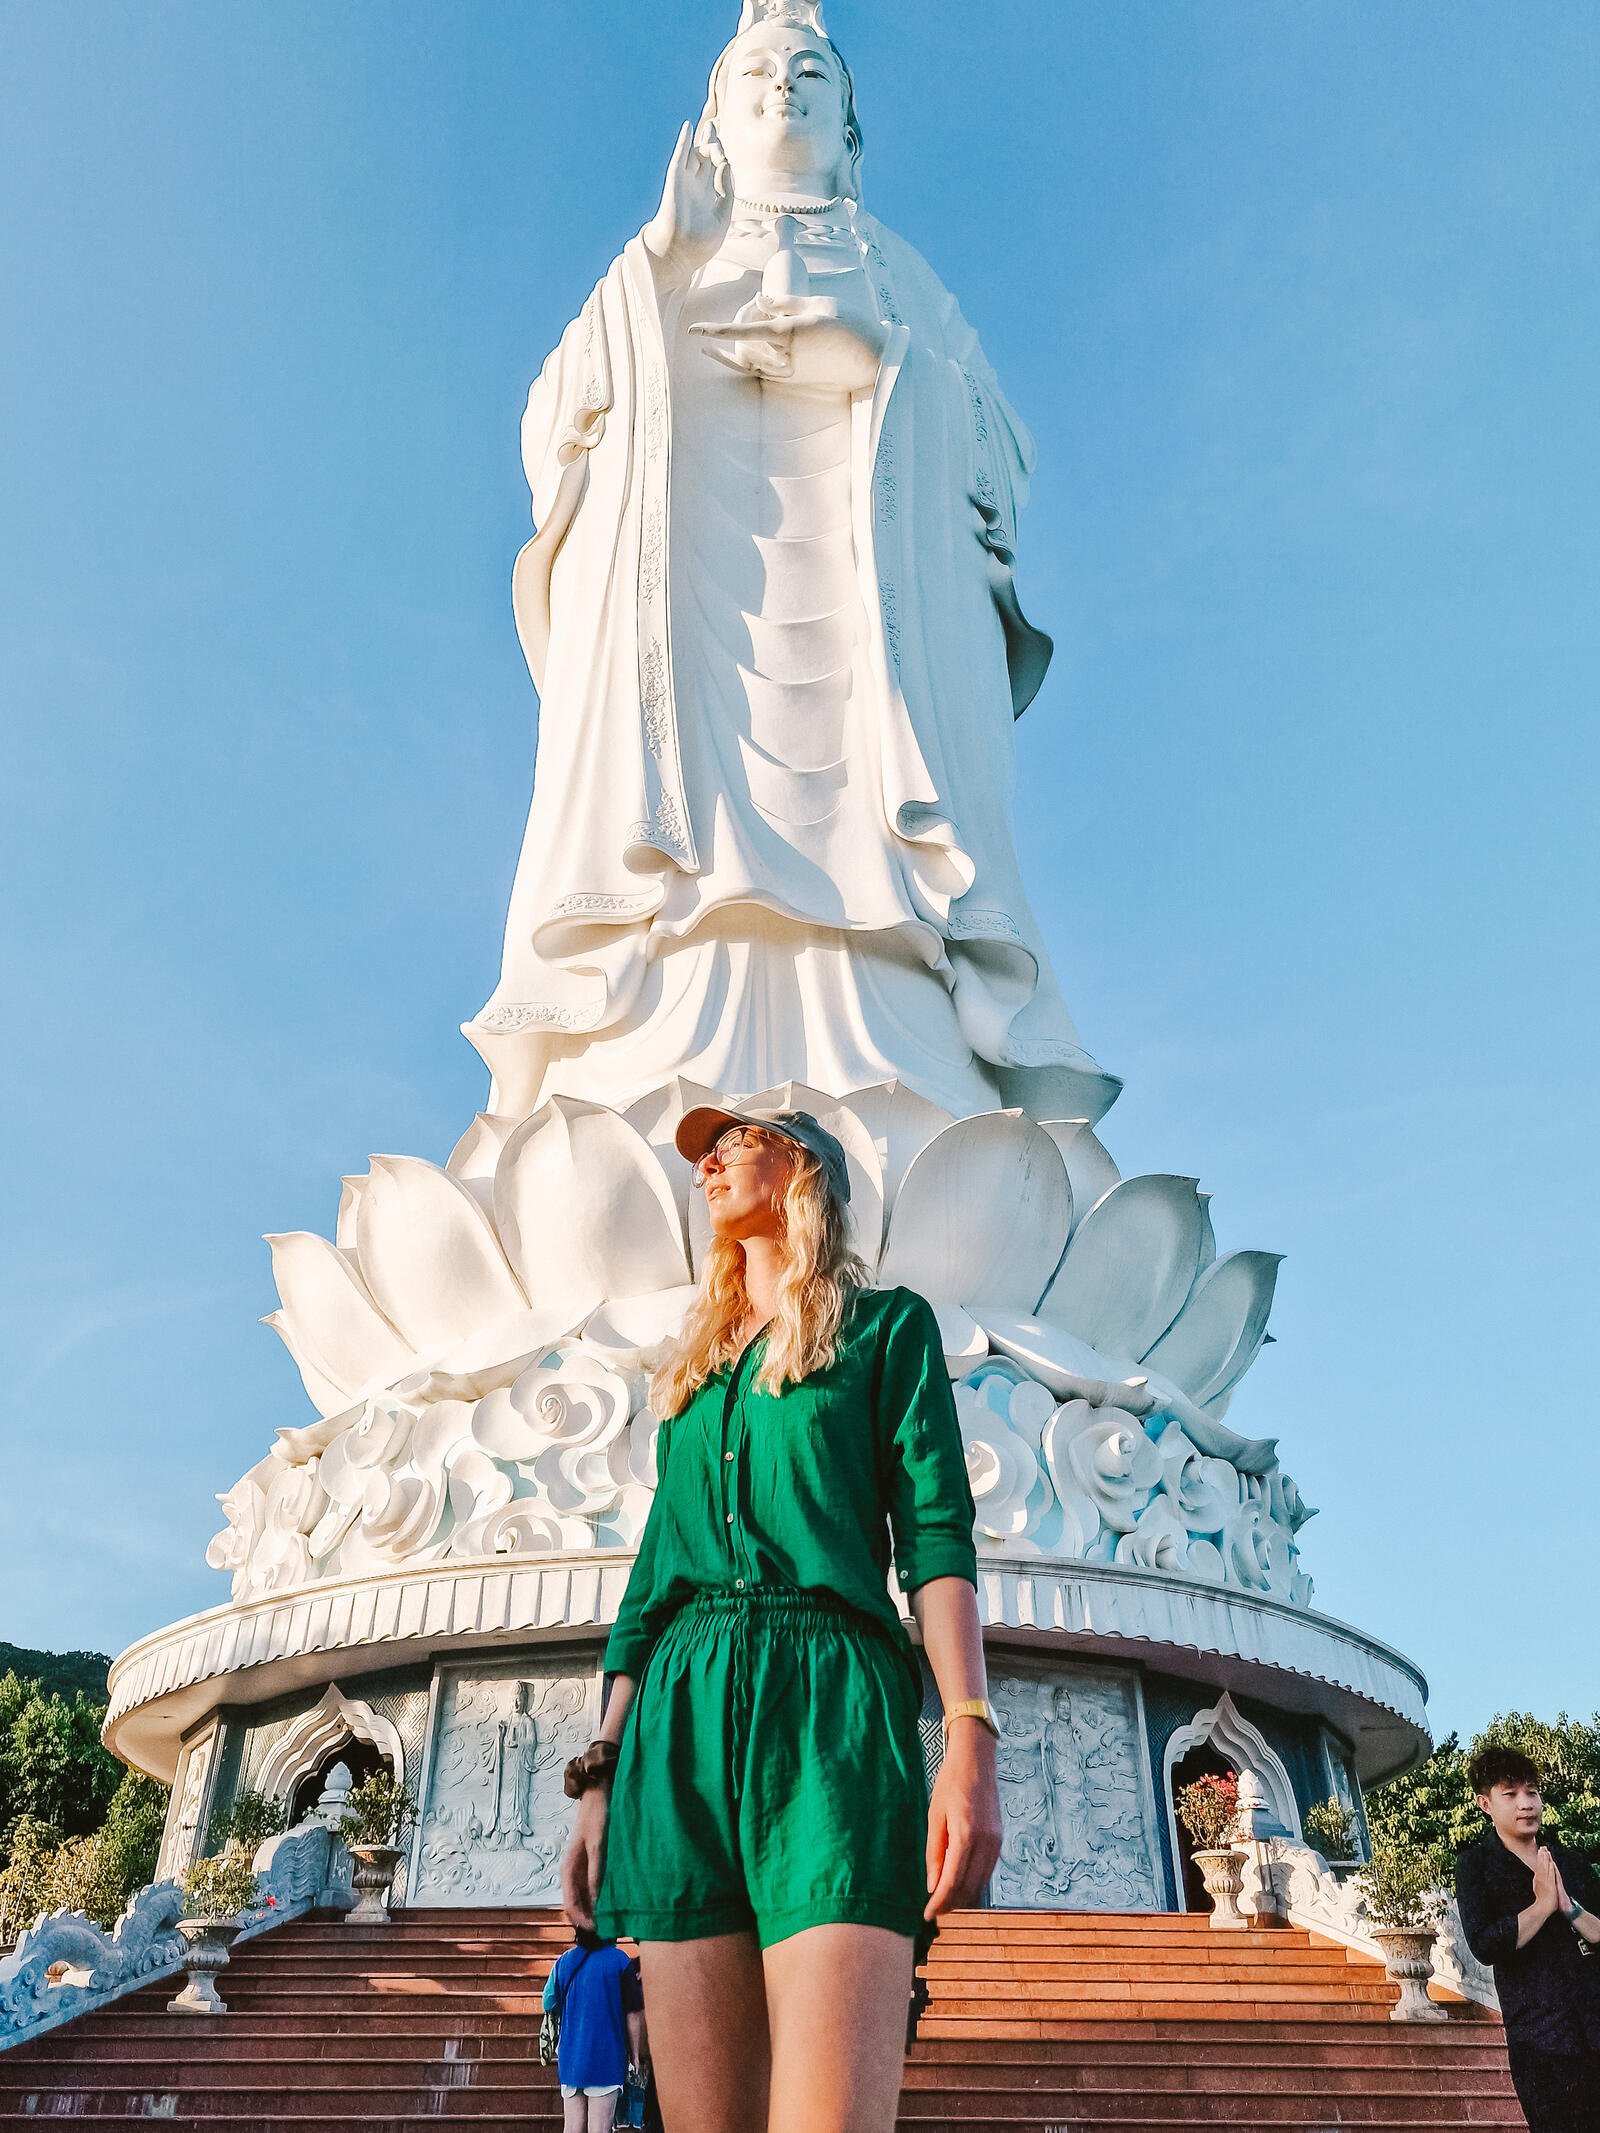 Helena standing in front of a huge white  lady buddha statue in Da Nang Vietnam